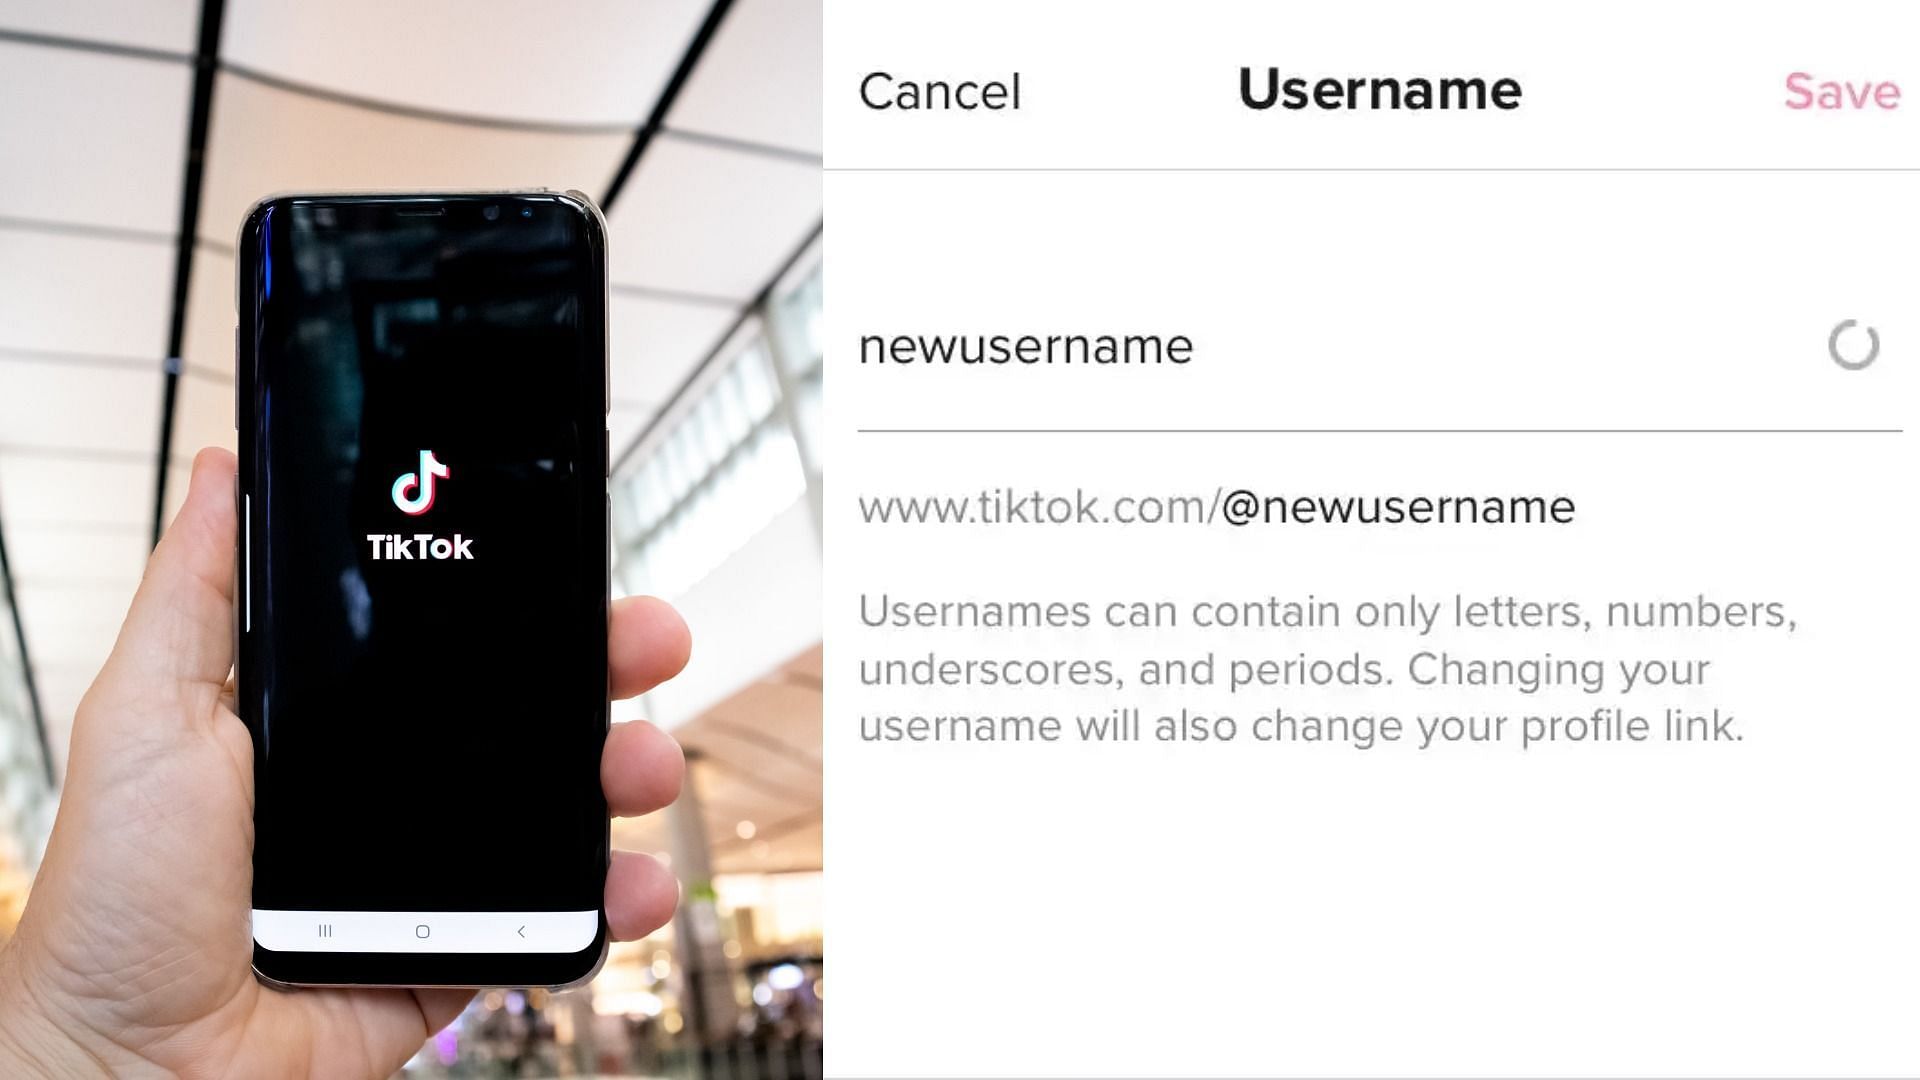 There are two ways to change your username on the video-focused social networking service (Images via Olivier Bergeron/Unsplash and Devon Delfino)